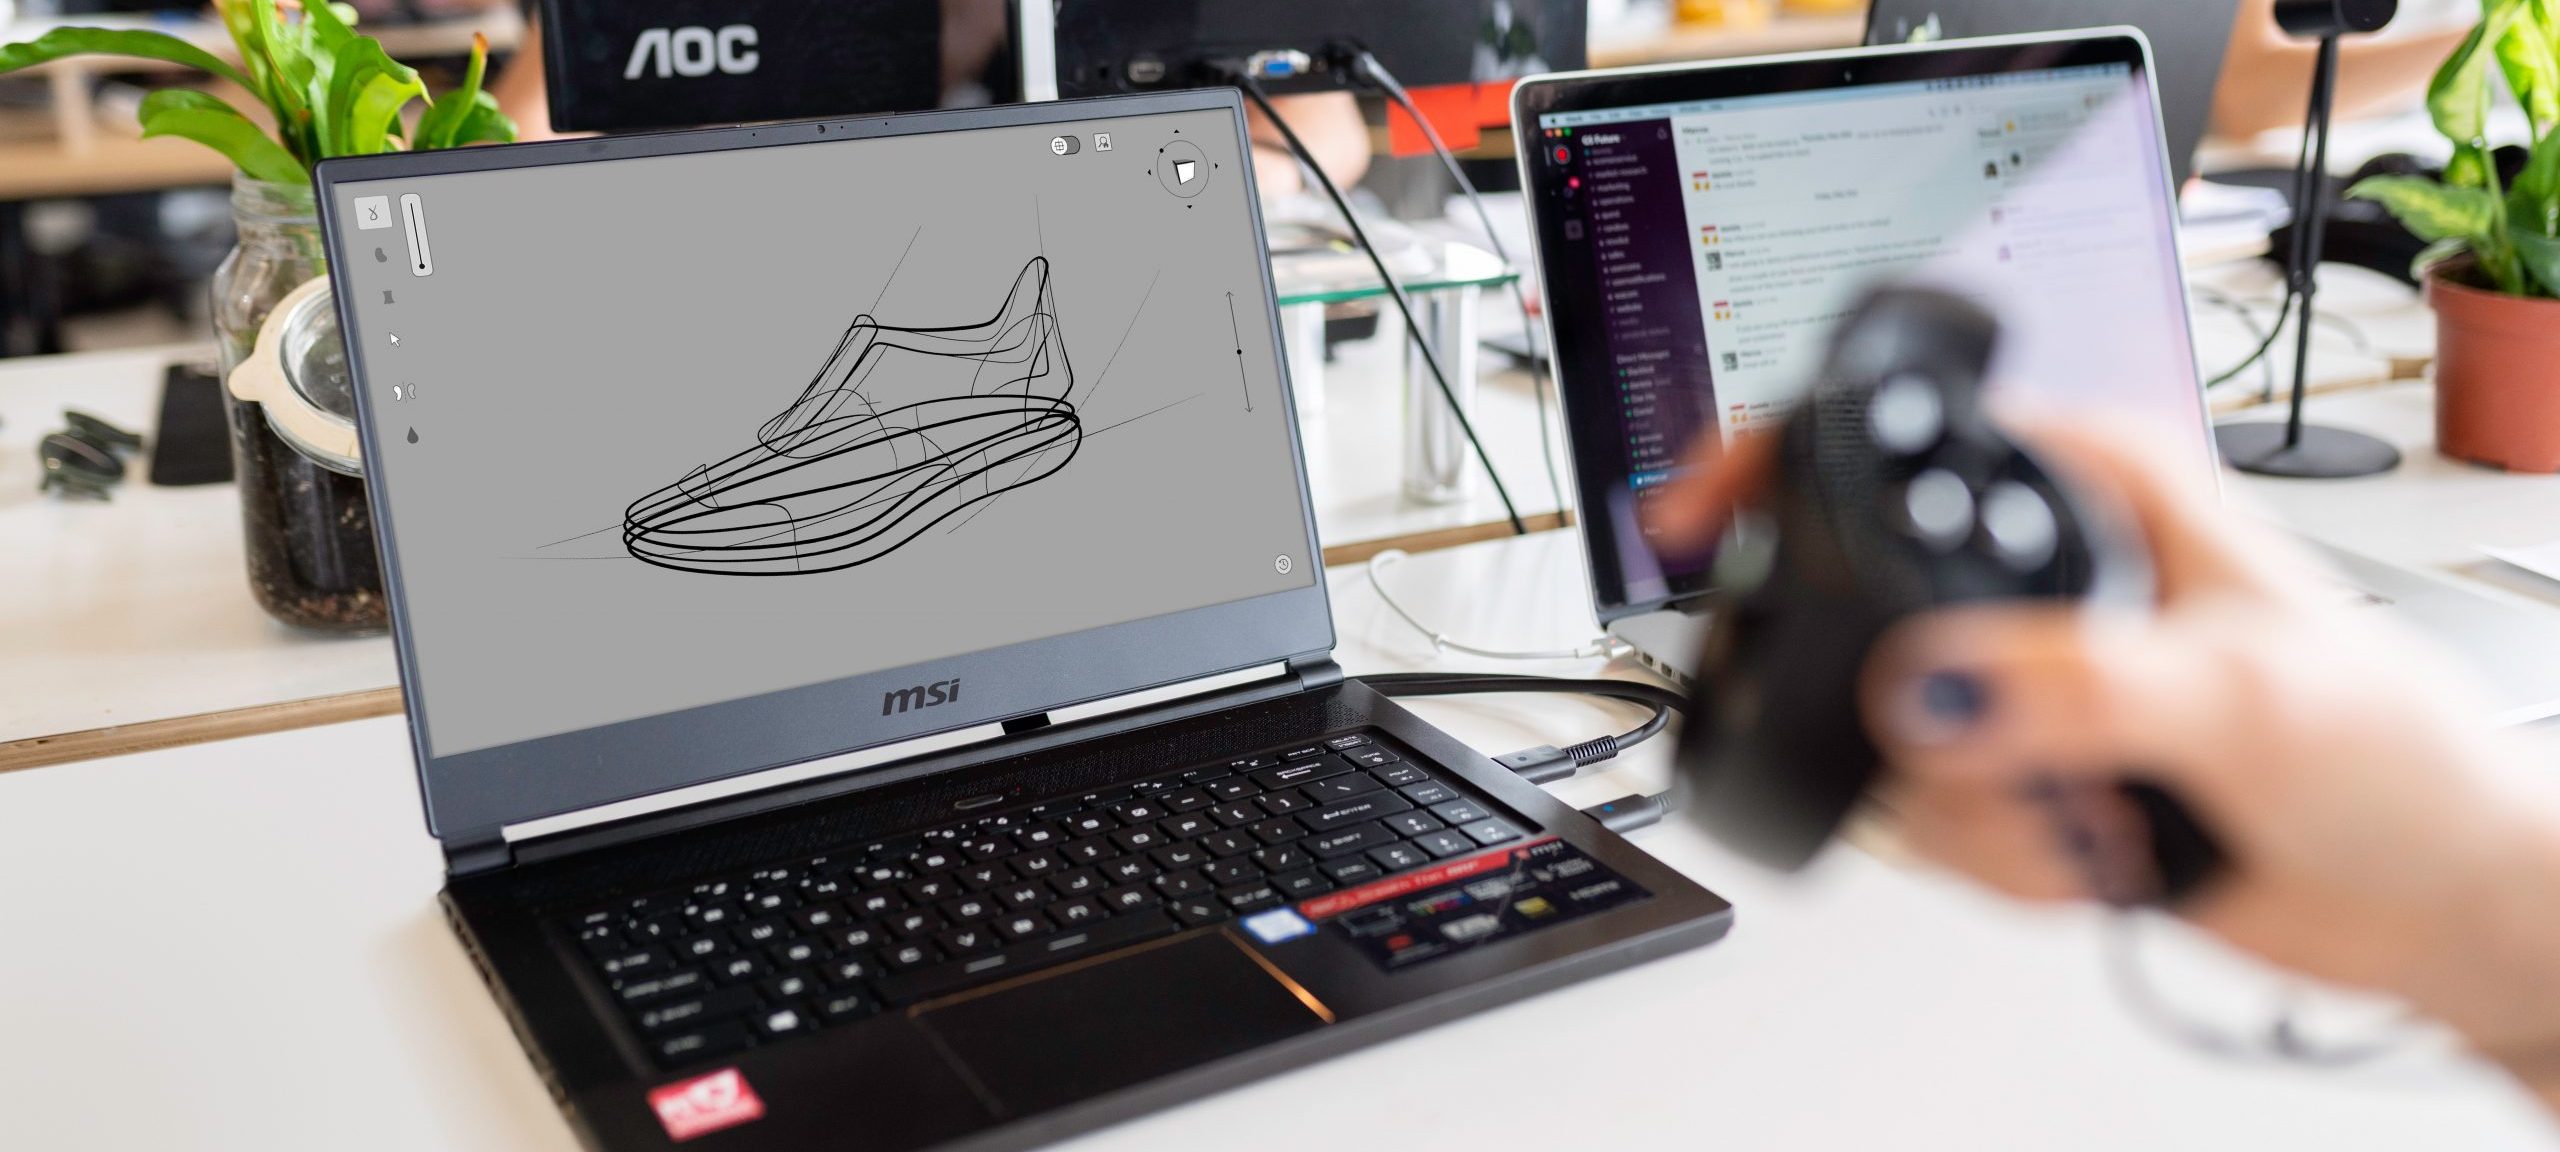 using a special controller to examine a 3d model of a shoe